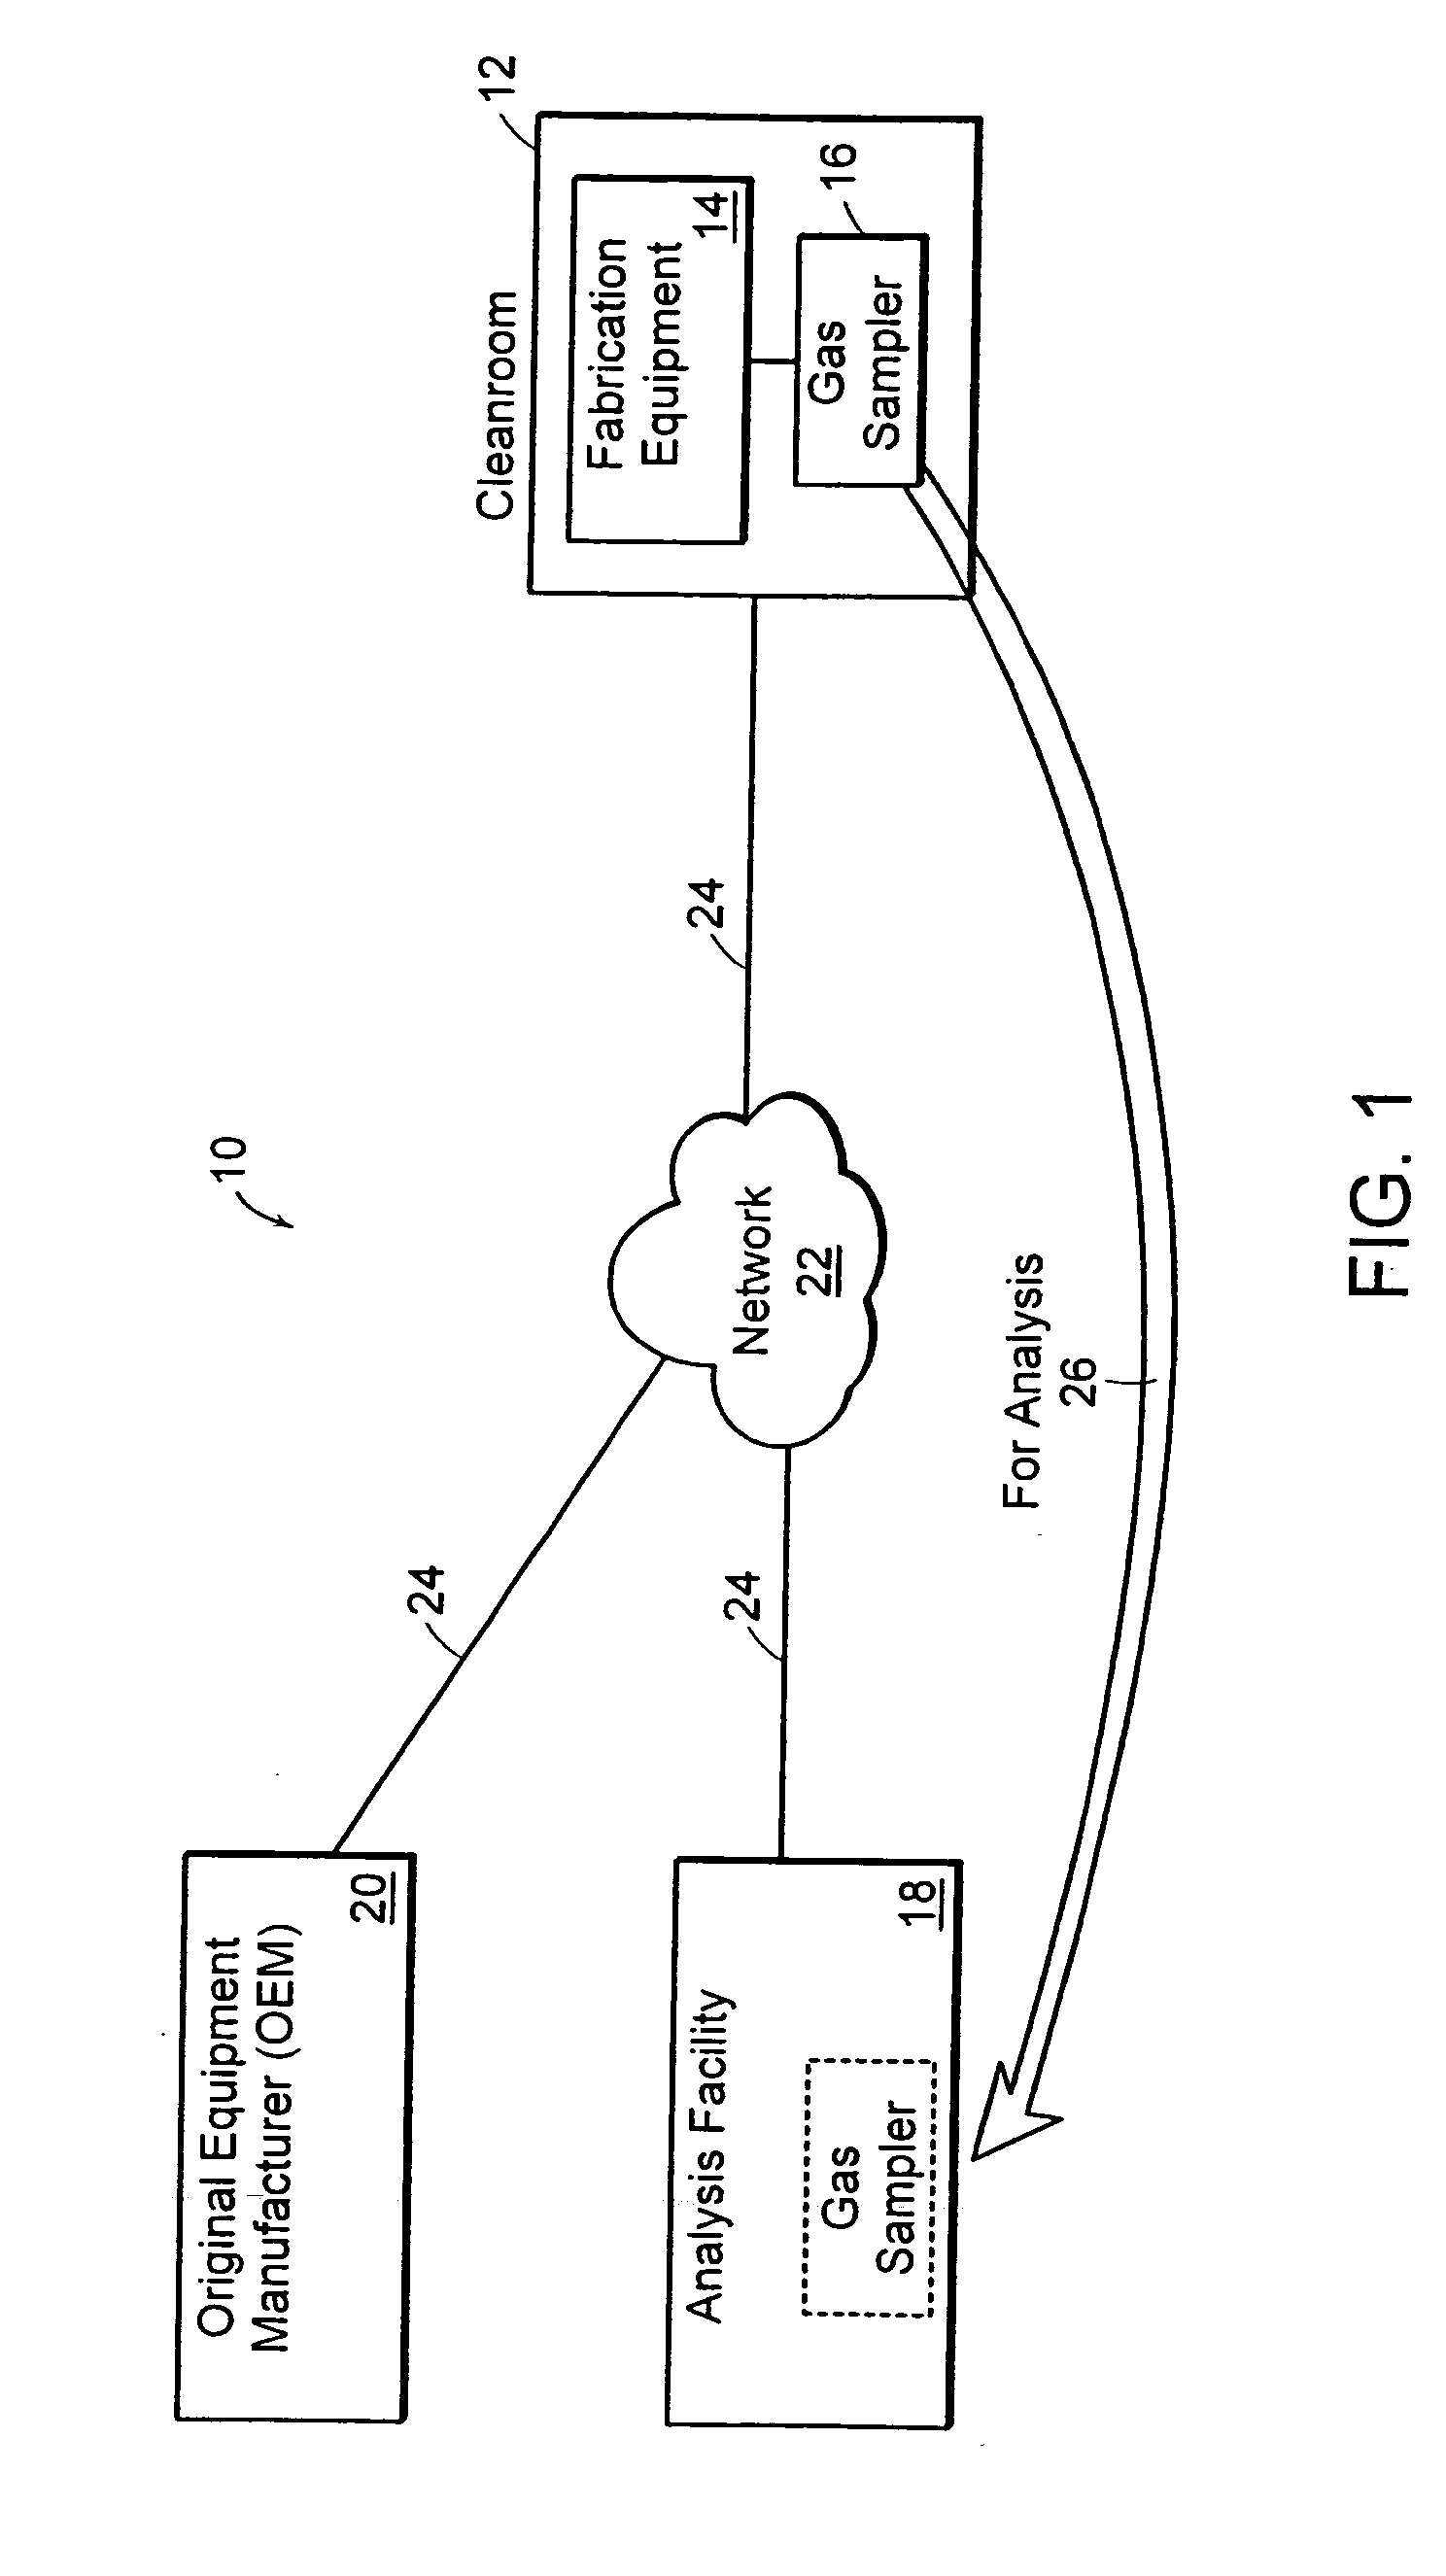 Systems and methods for detecting contaminants